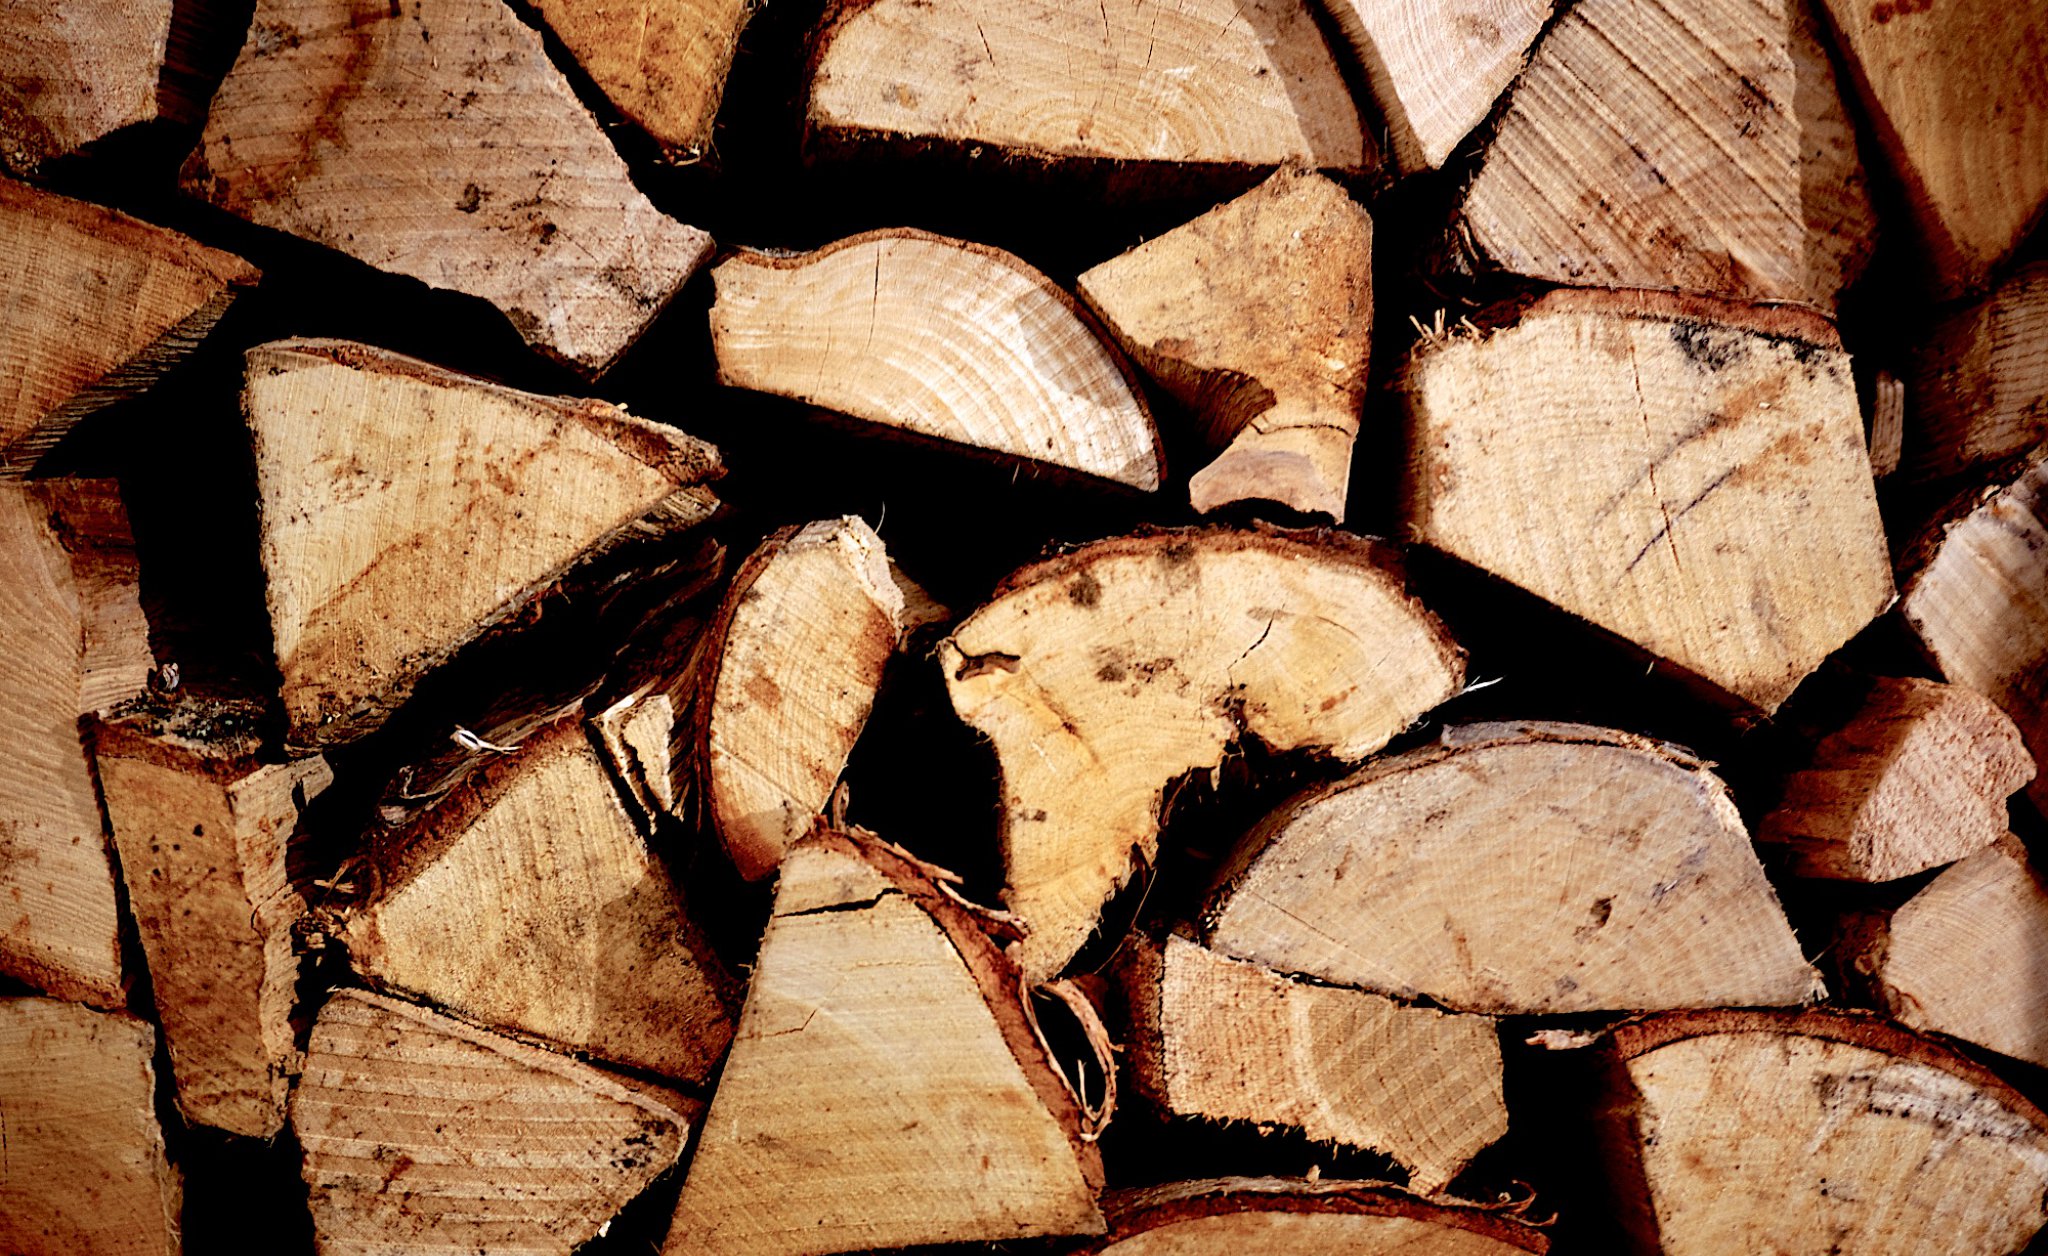 Image showing kiln dried logs stacked in a pile